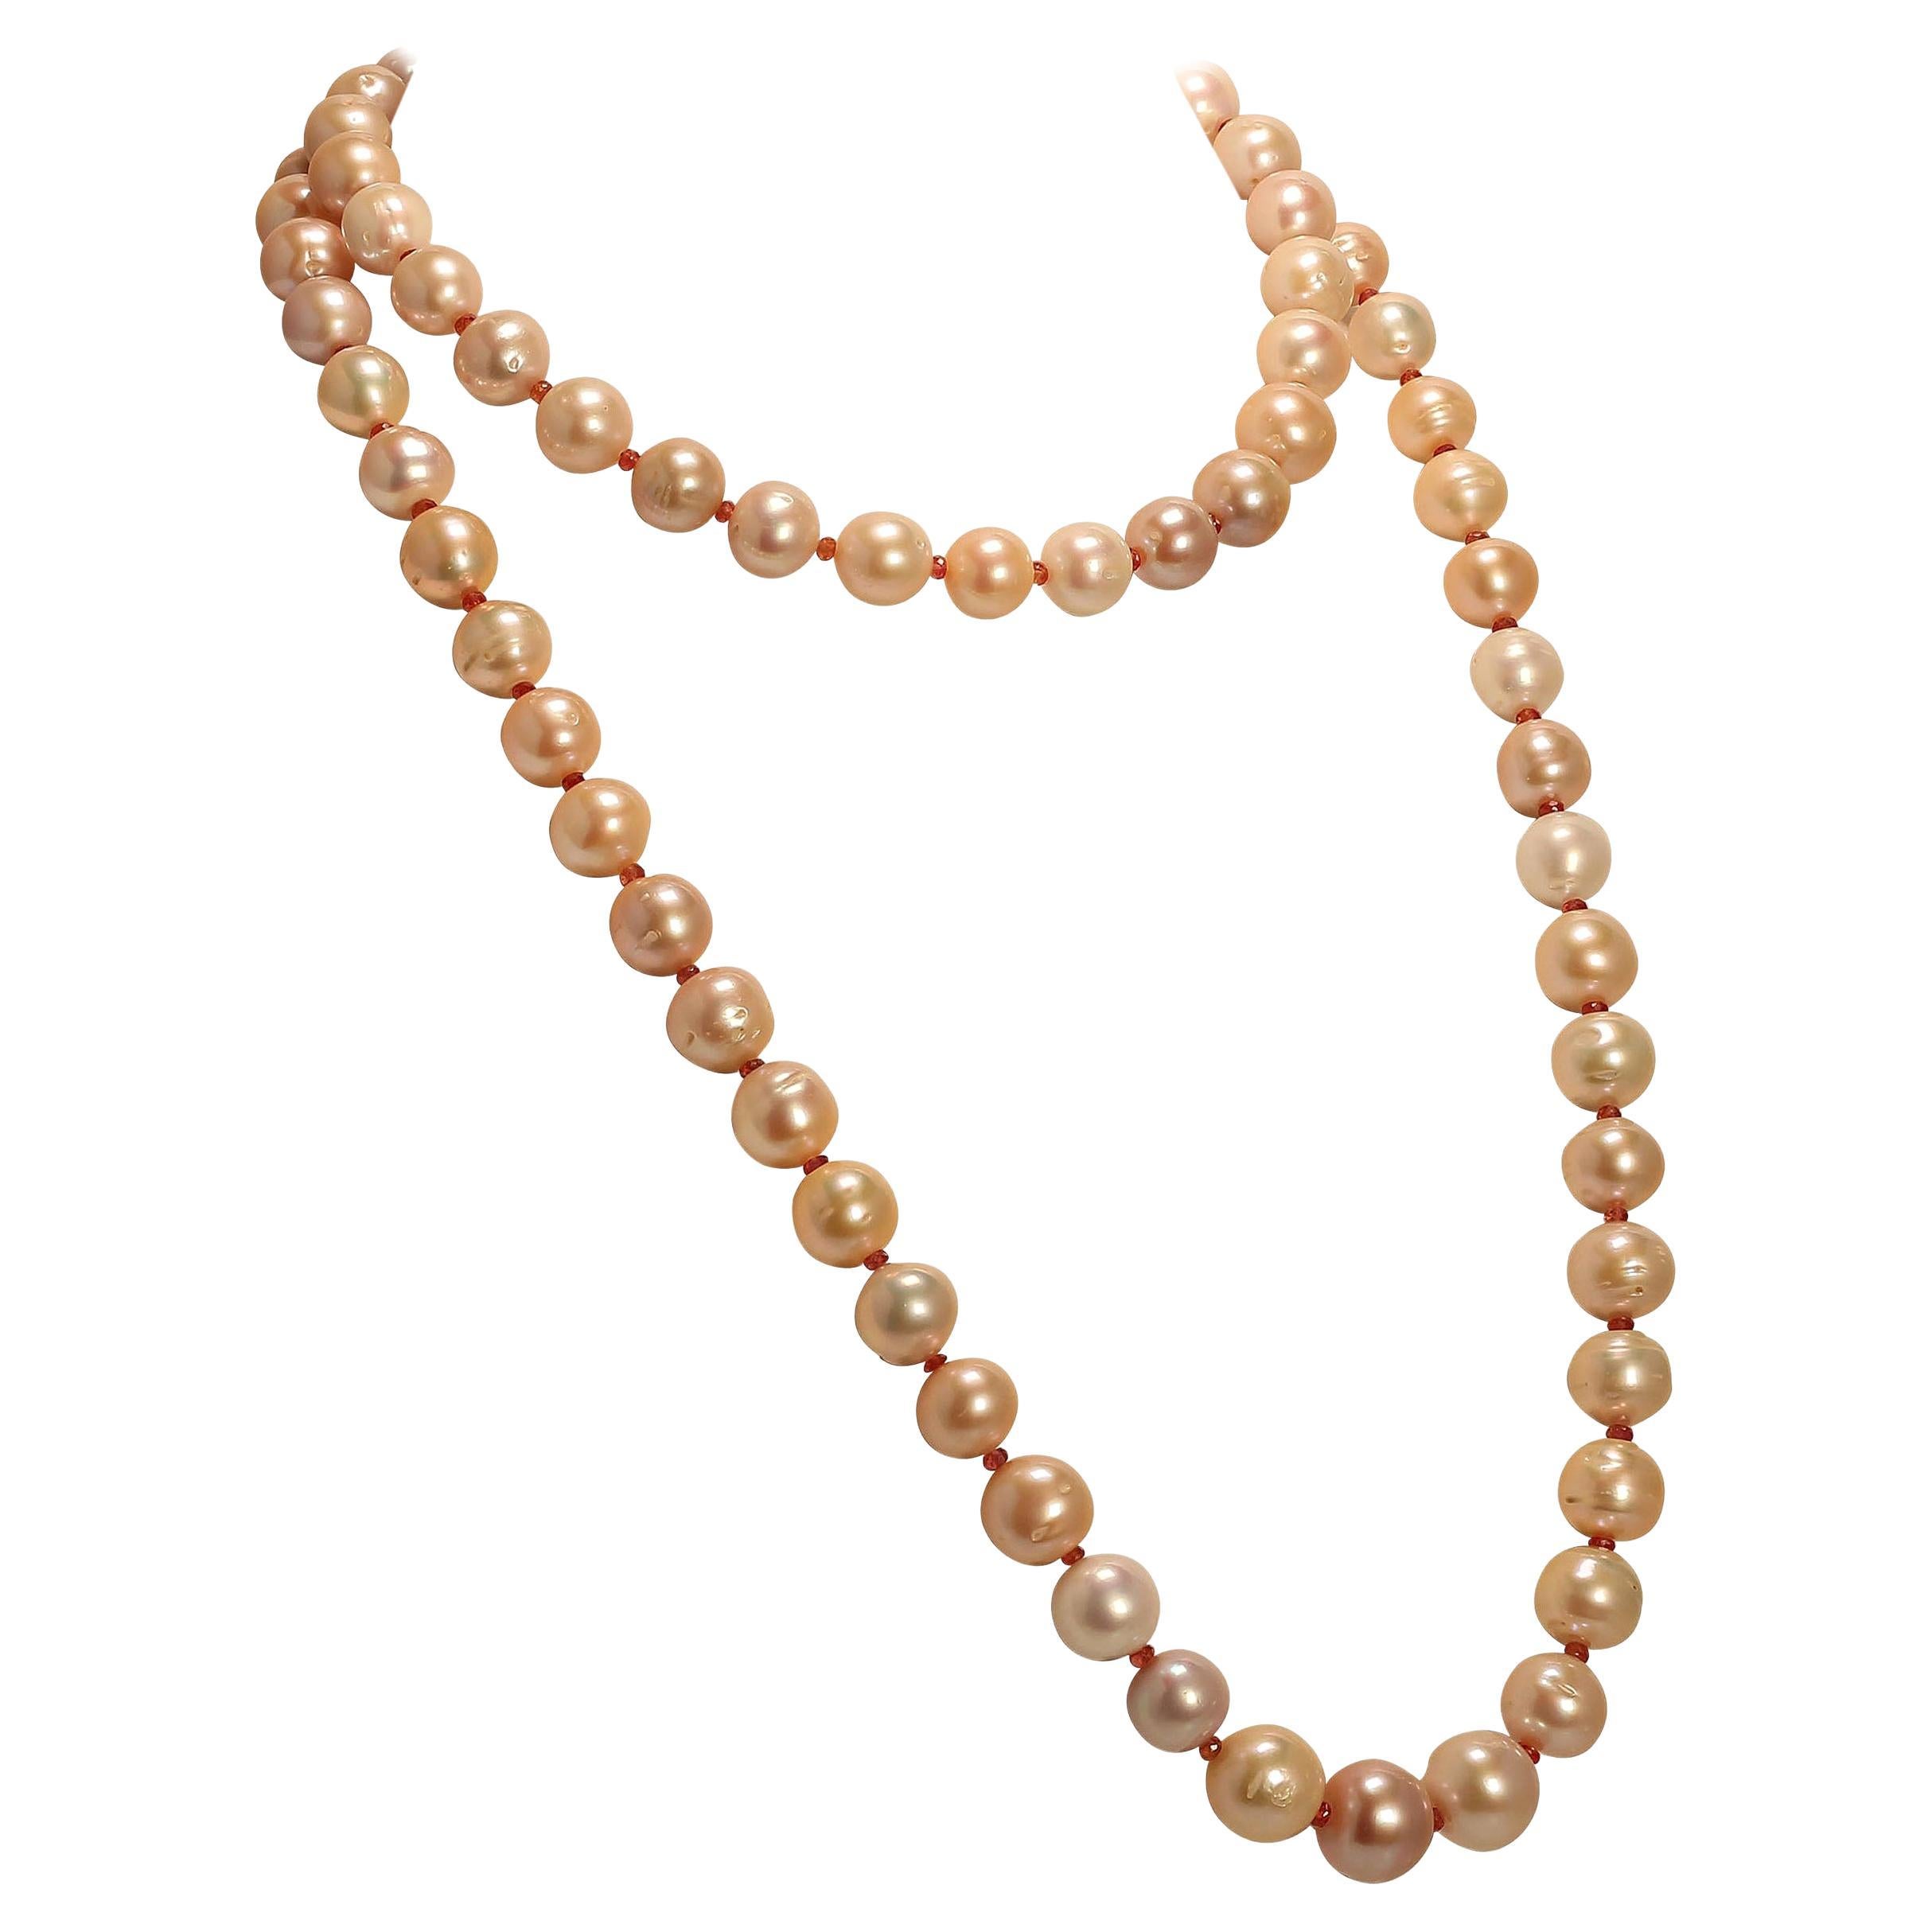 Two Strand Necklace of Lustrous Peachy Pearls & Orange Sapphires June Birthstone